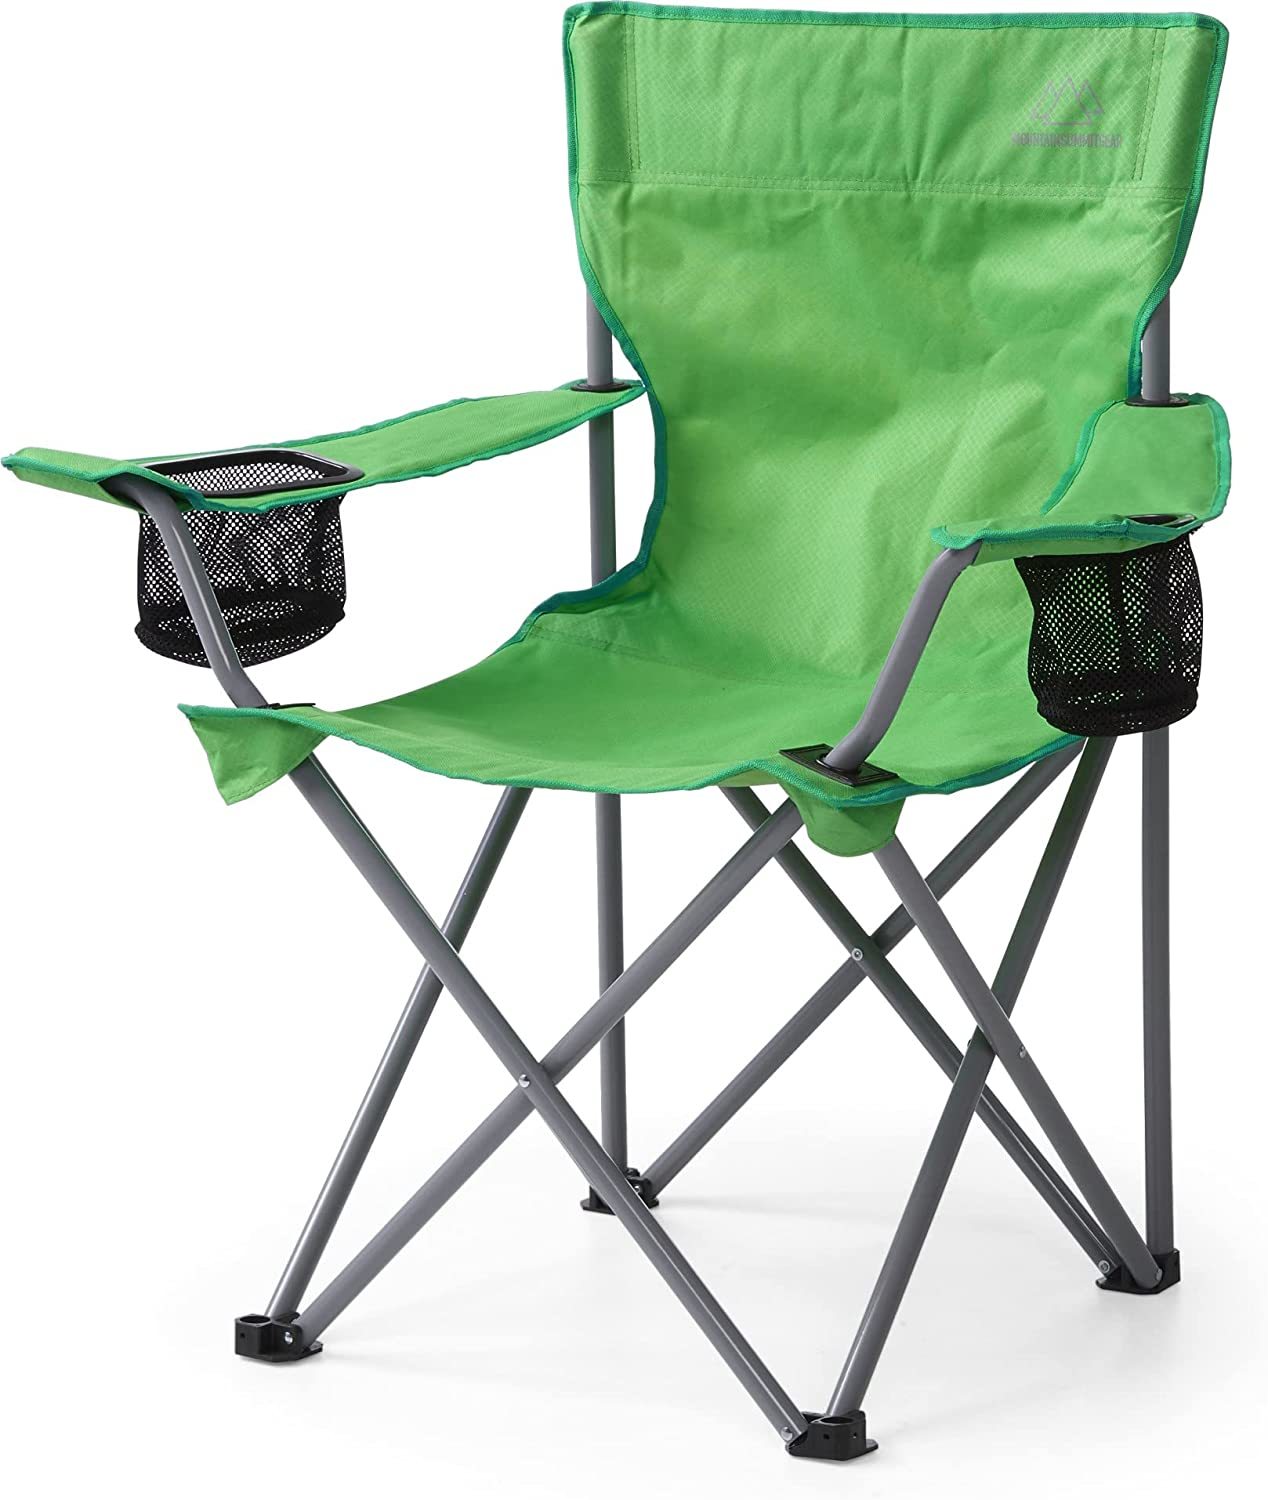 Primary image for Camping Chairs For Adults, Folding Chair For Outside (By Caddis Sports Inc.),